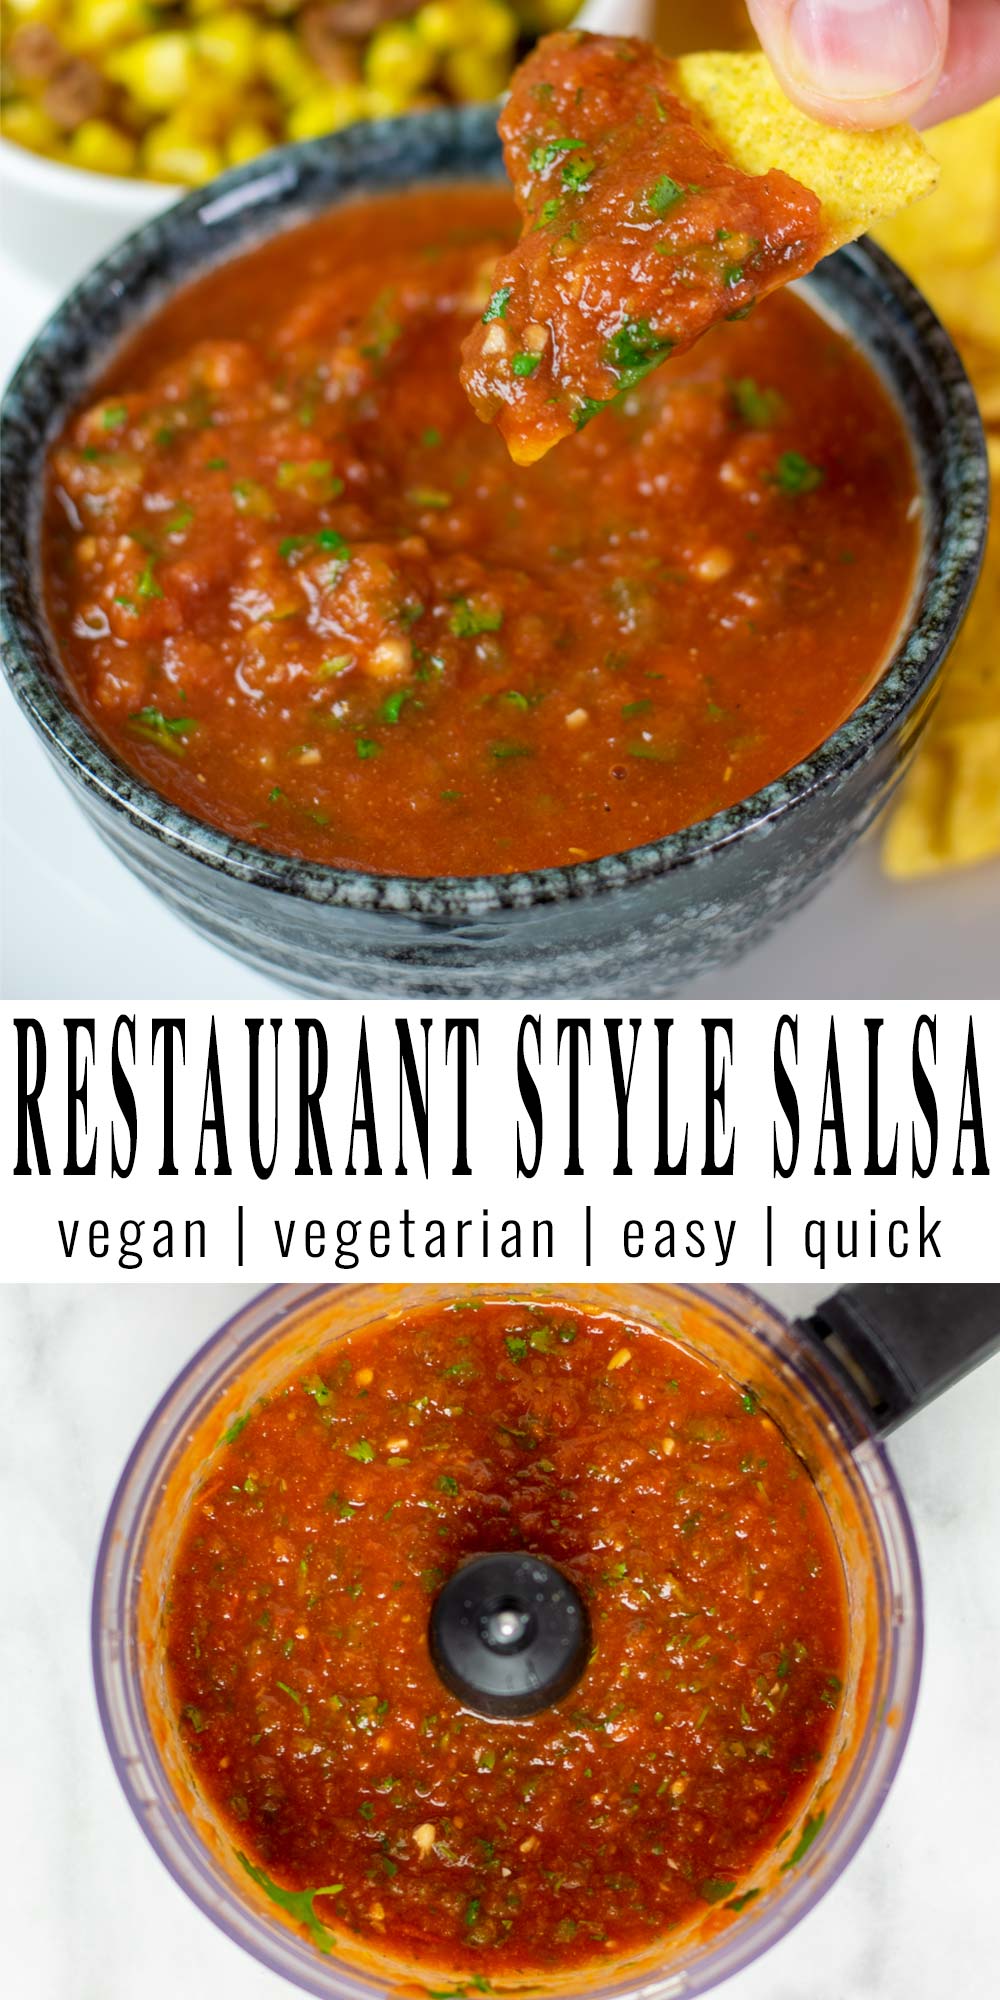 Collage of two pictures of the Restaurant Style Salsa with recipe title text.